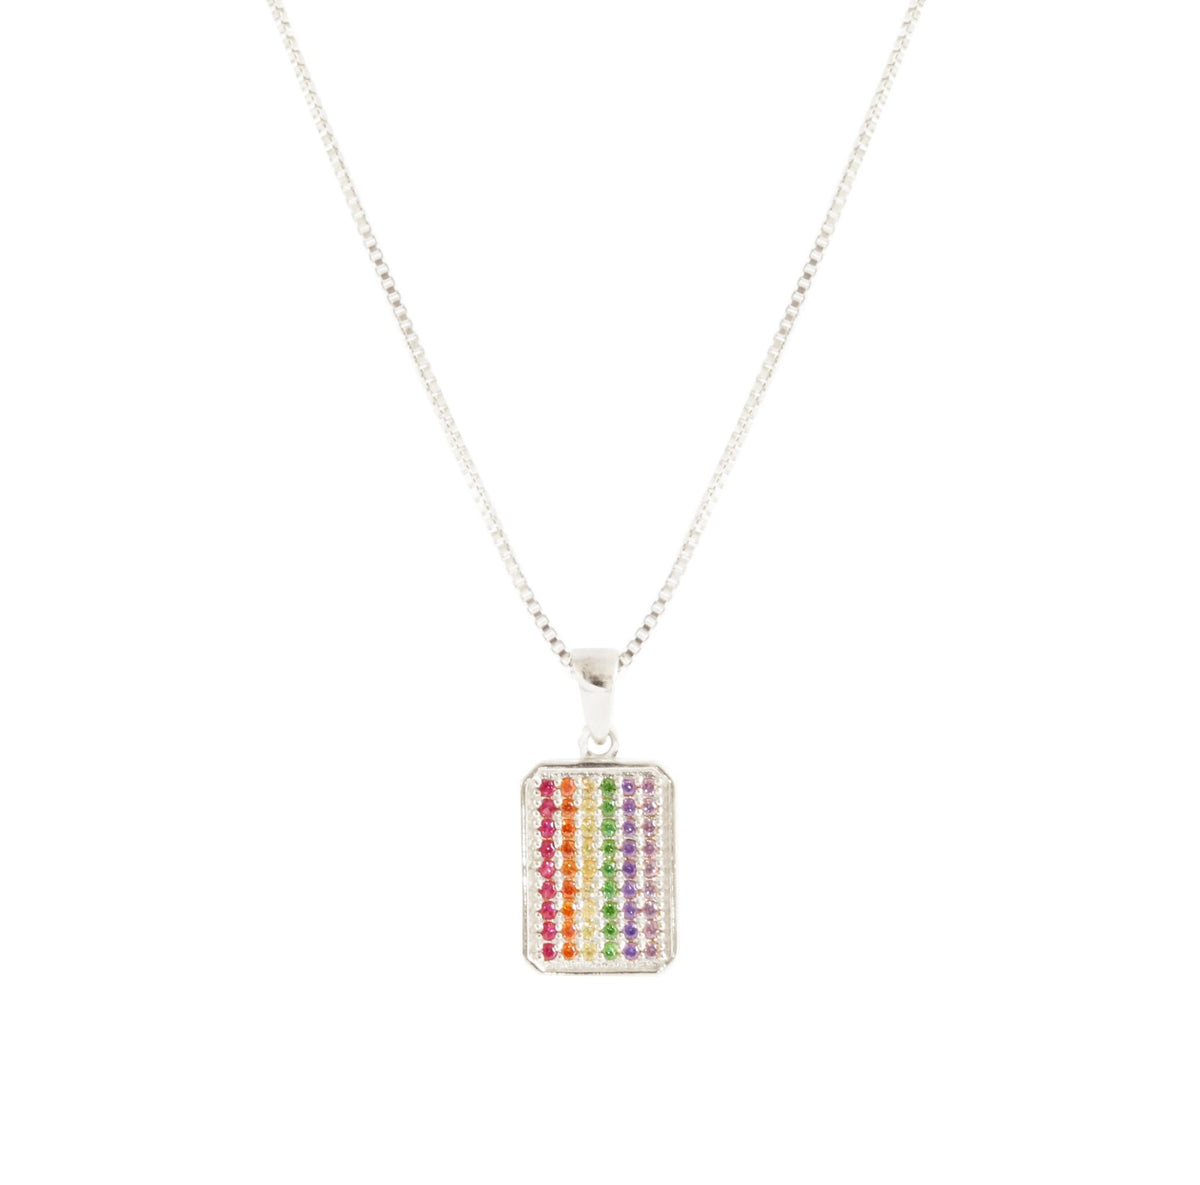 LOVE DAINTY DOG TAG NECKLACE - RAINBOW CUBIC ZIRCONIA &amp; GOLD - SO PRETTY CARA COTTER